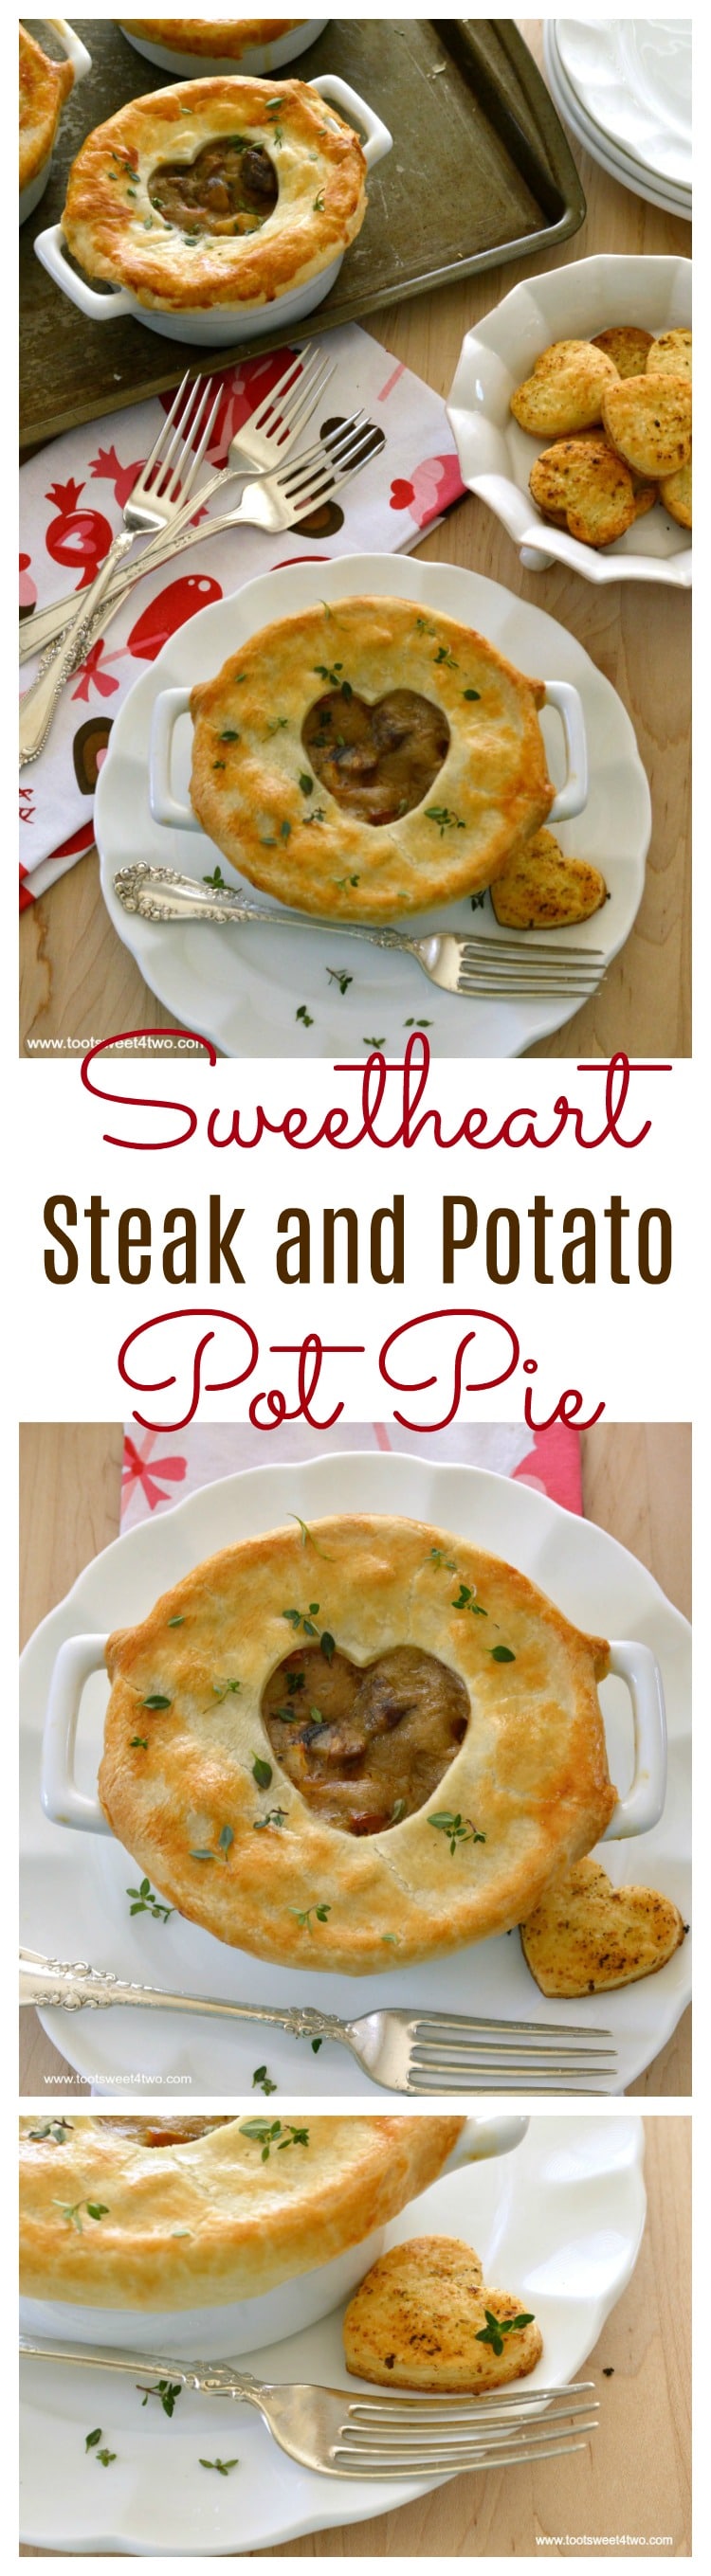 Sweetheart Steak and Potato Pot Pie in individual casserole dishes for Pinterest